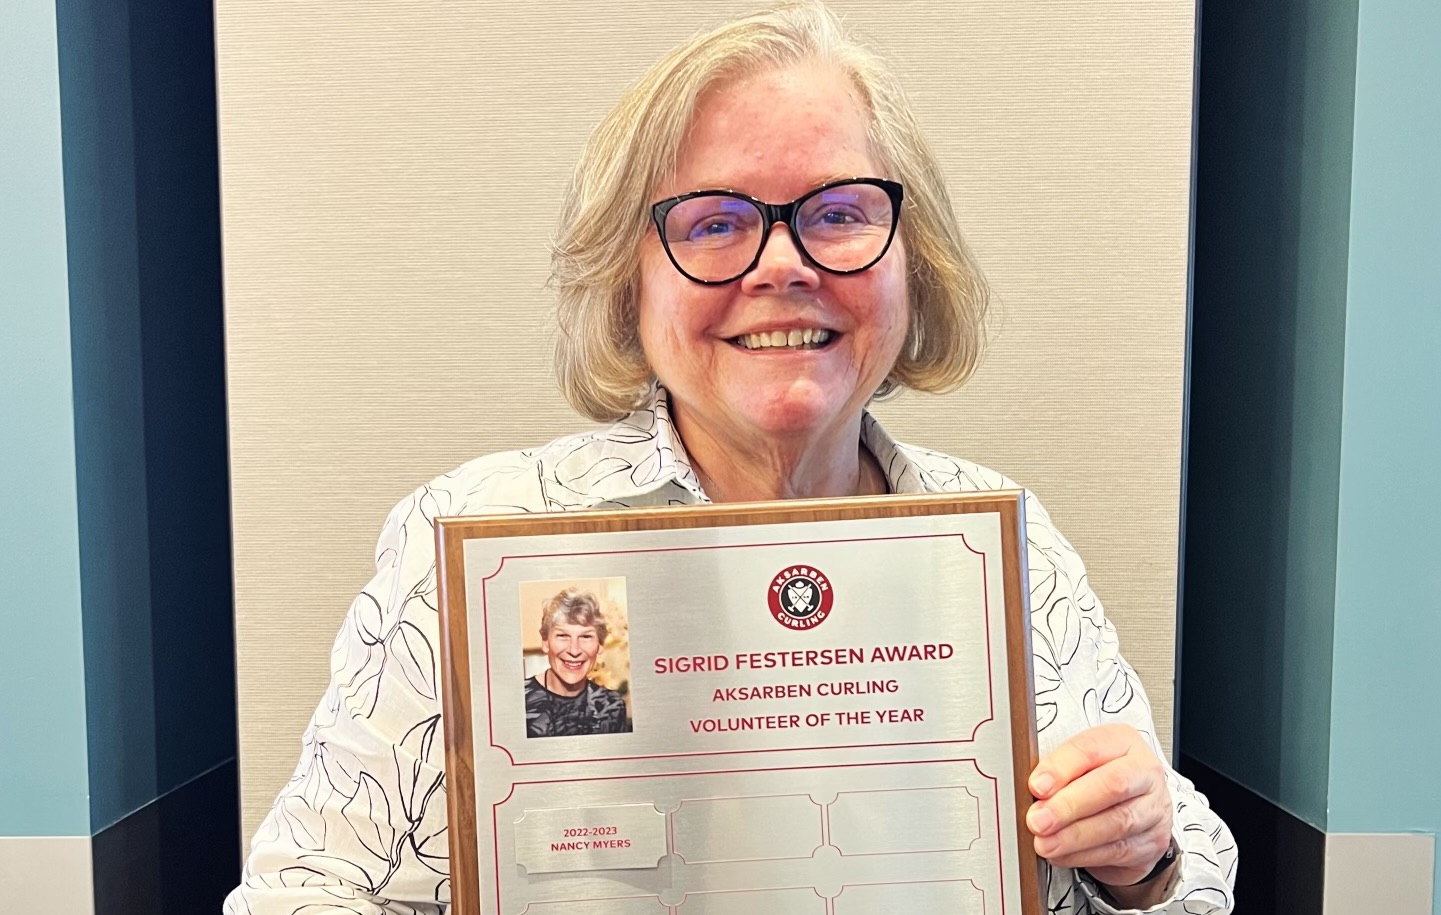 Nancy Myers holding the Sigrid Festersen Volunteer of the Year Award plaque